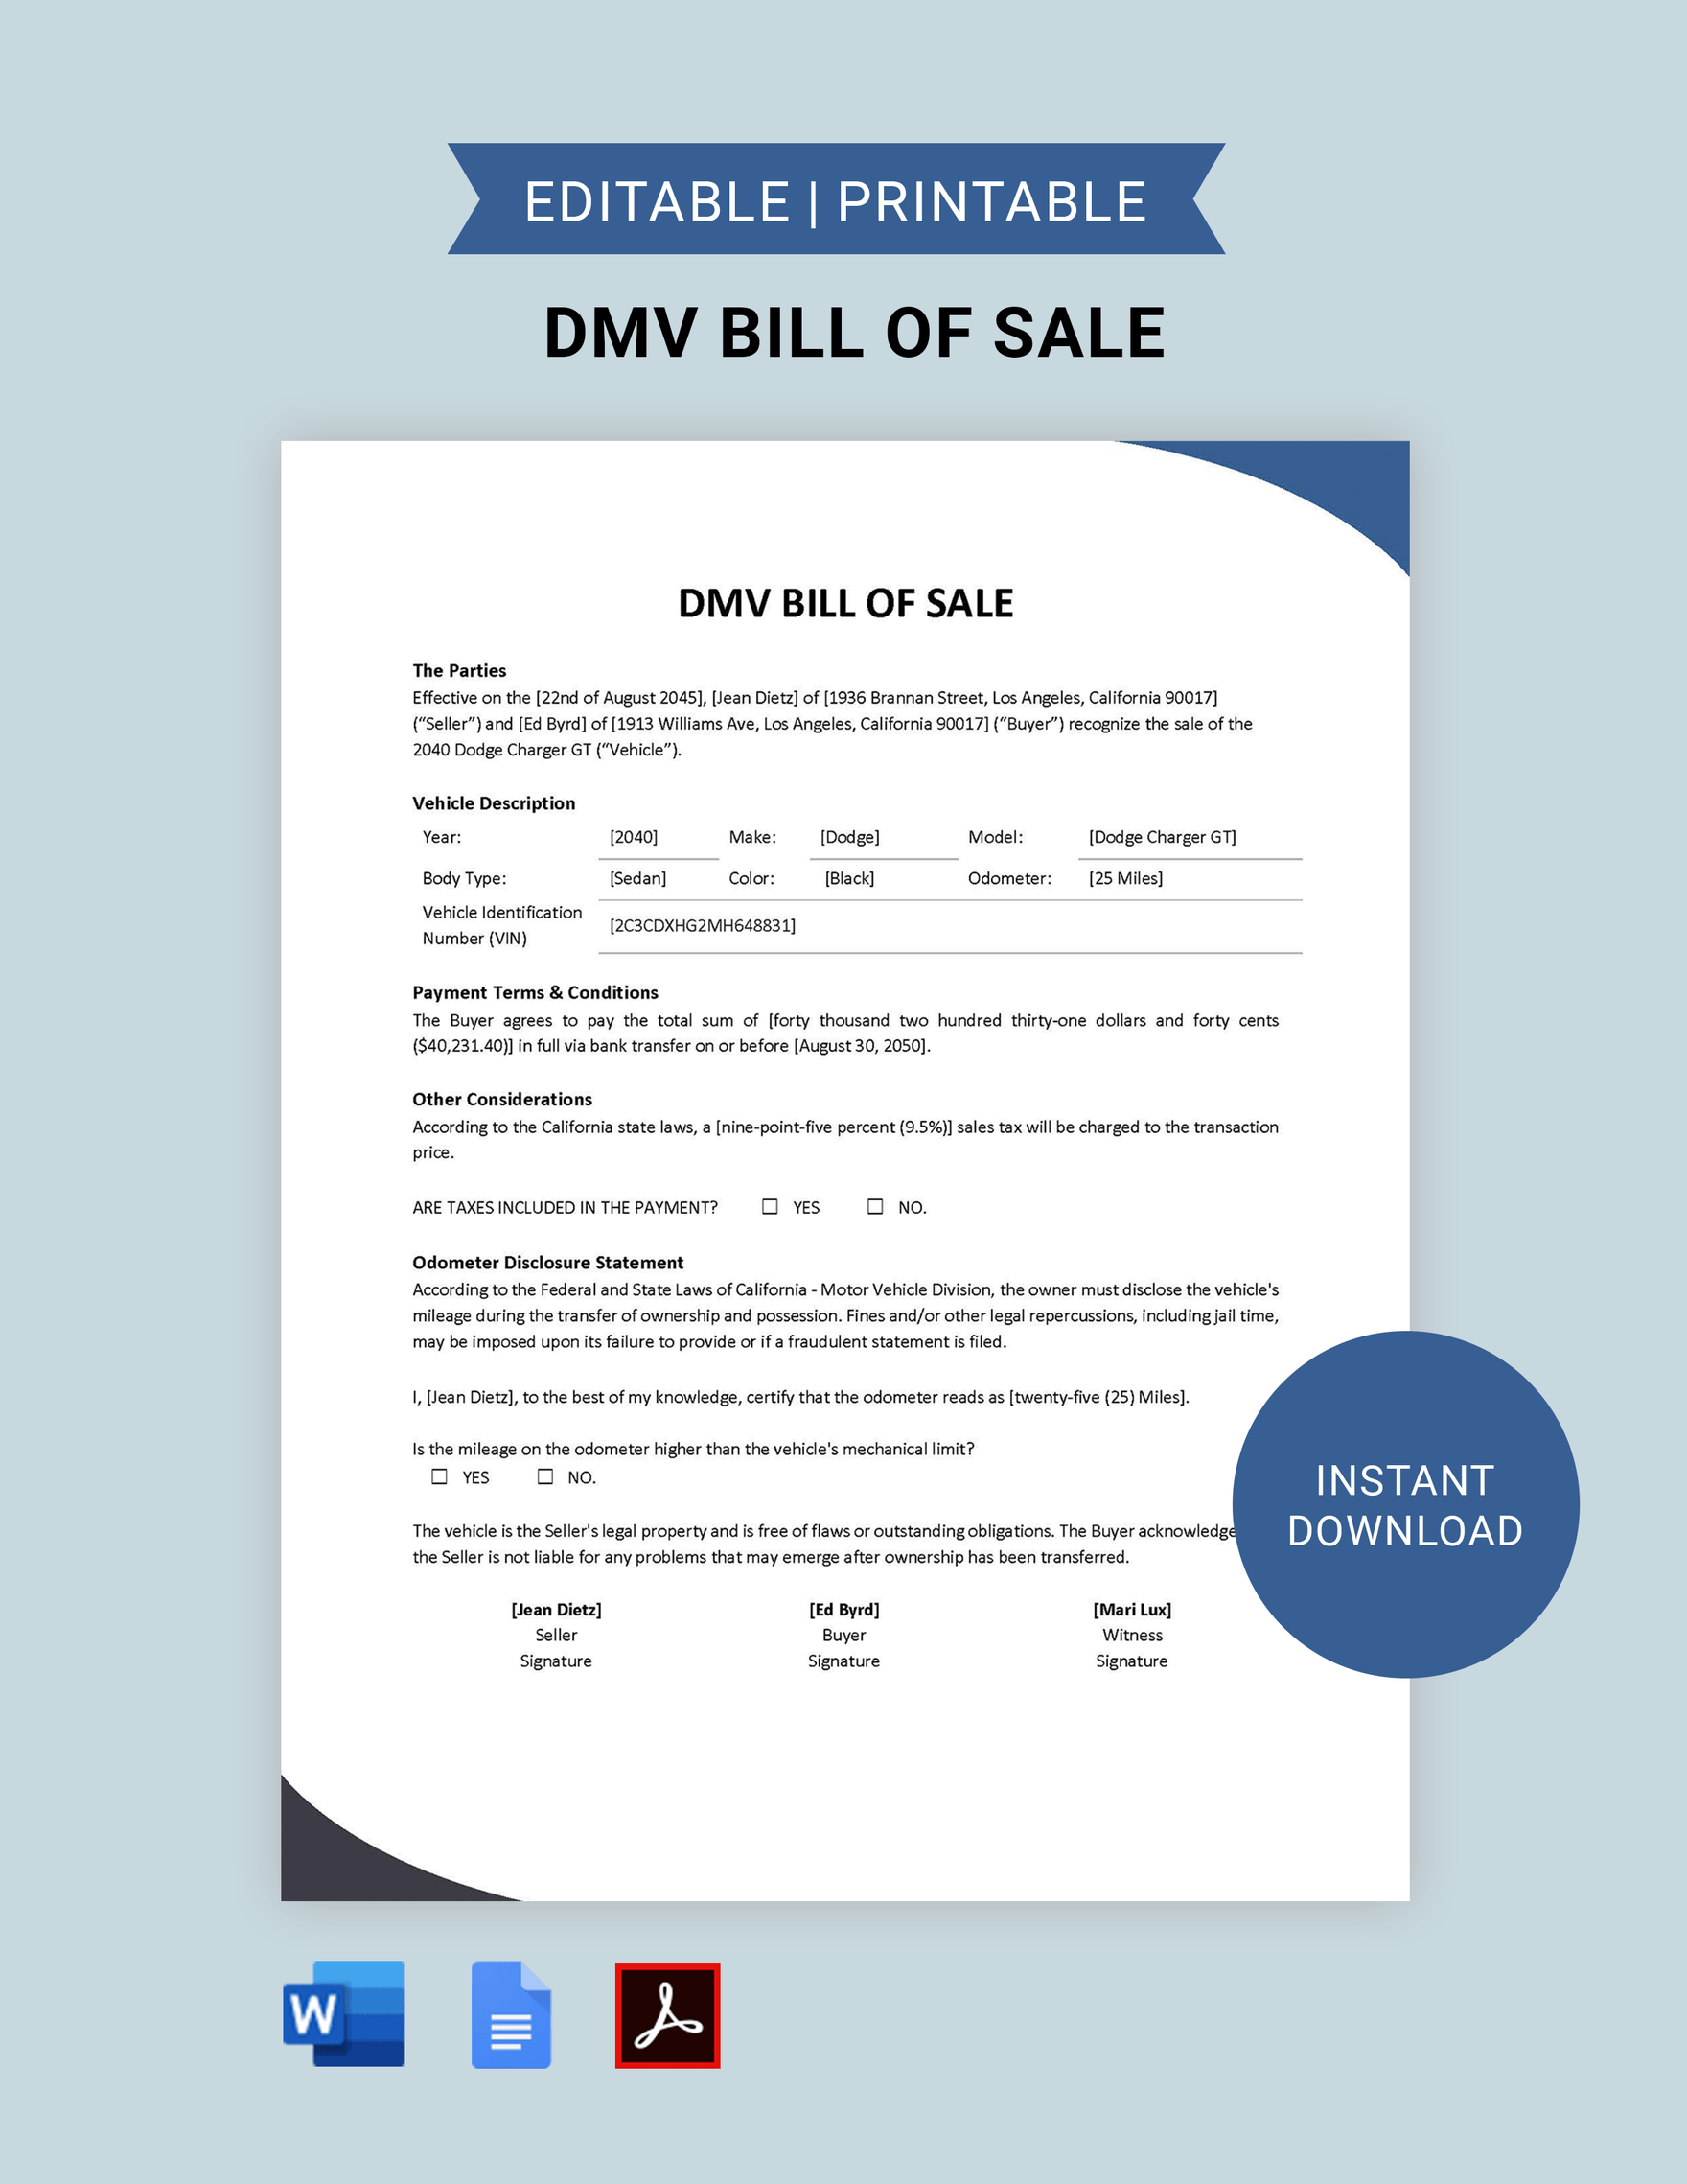 DMV Bill of Sale Template in Word, Google Docs, PDF, Apple Pages